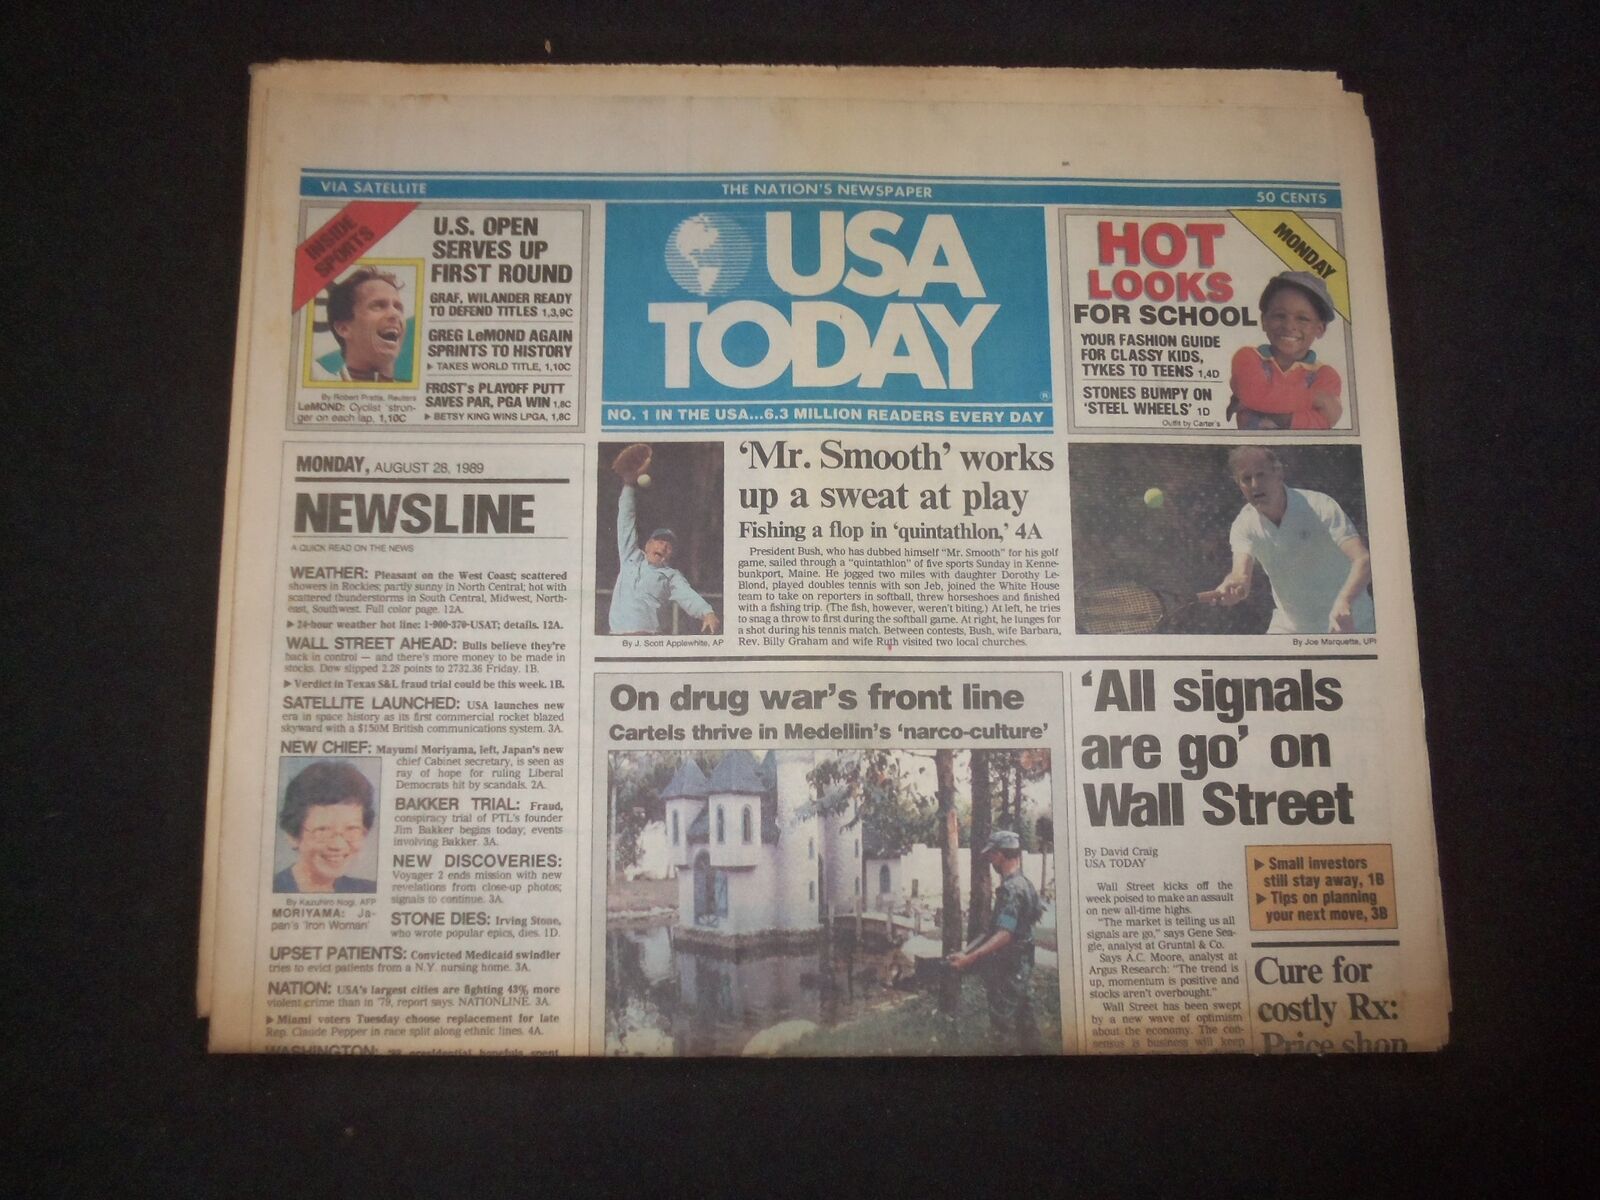 1989 AUGUST 28 USA TODAY NEWSPAPER - ALL SIGNALS ARE GO ON WALL STREET - NP 7770